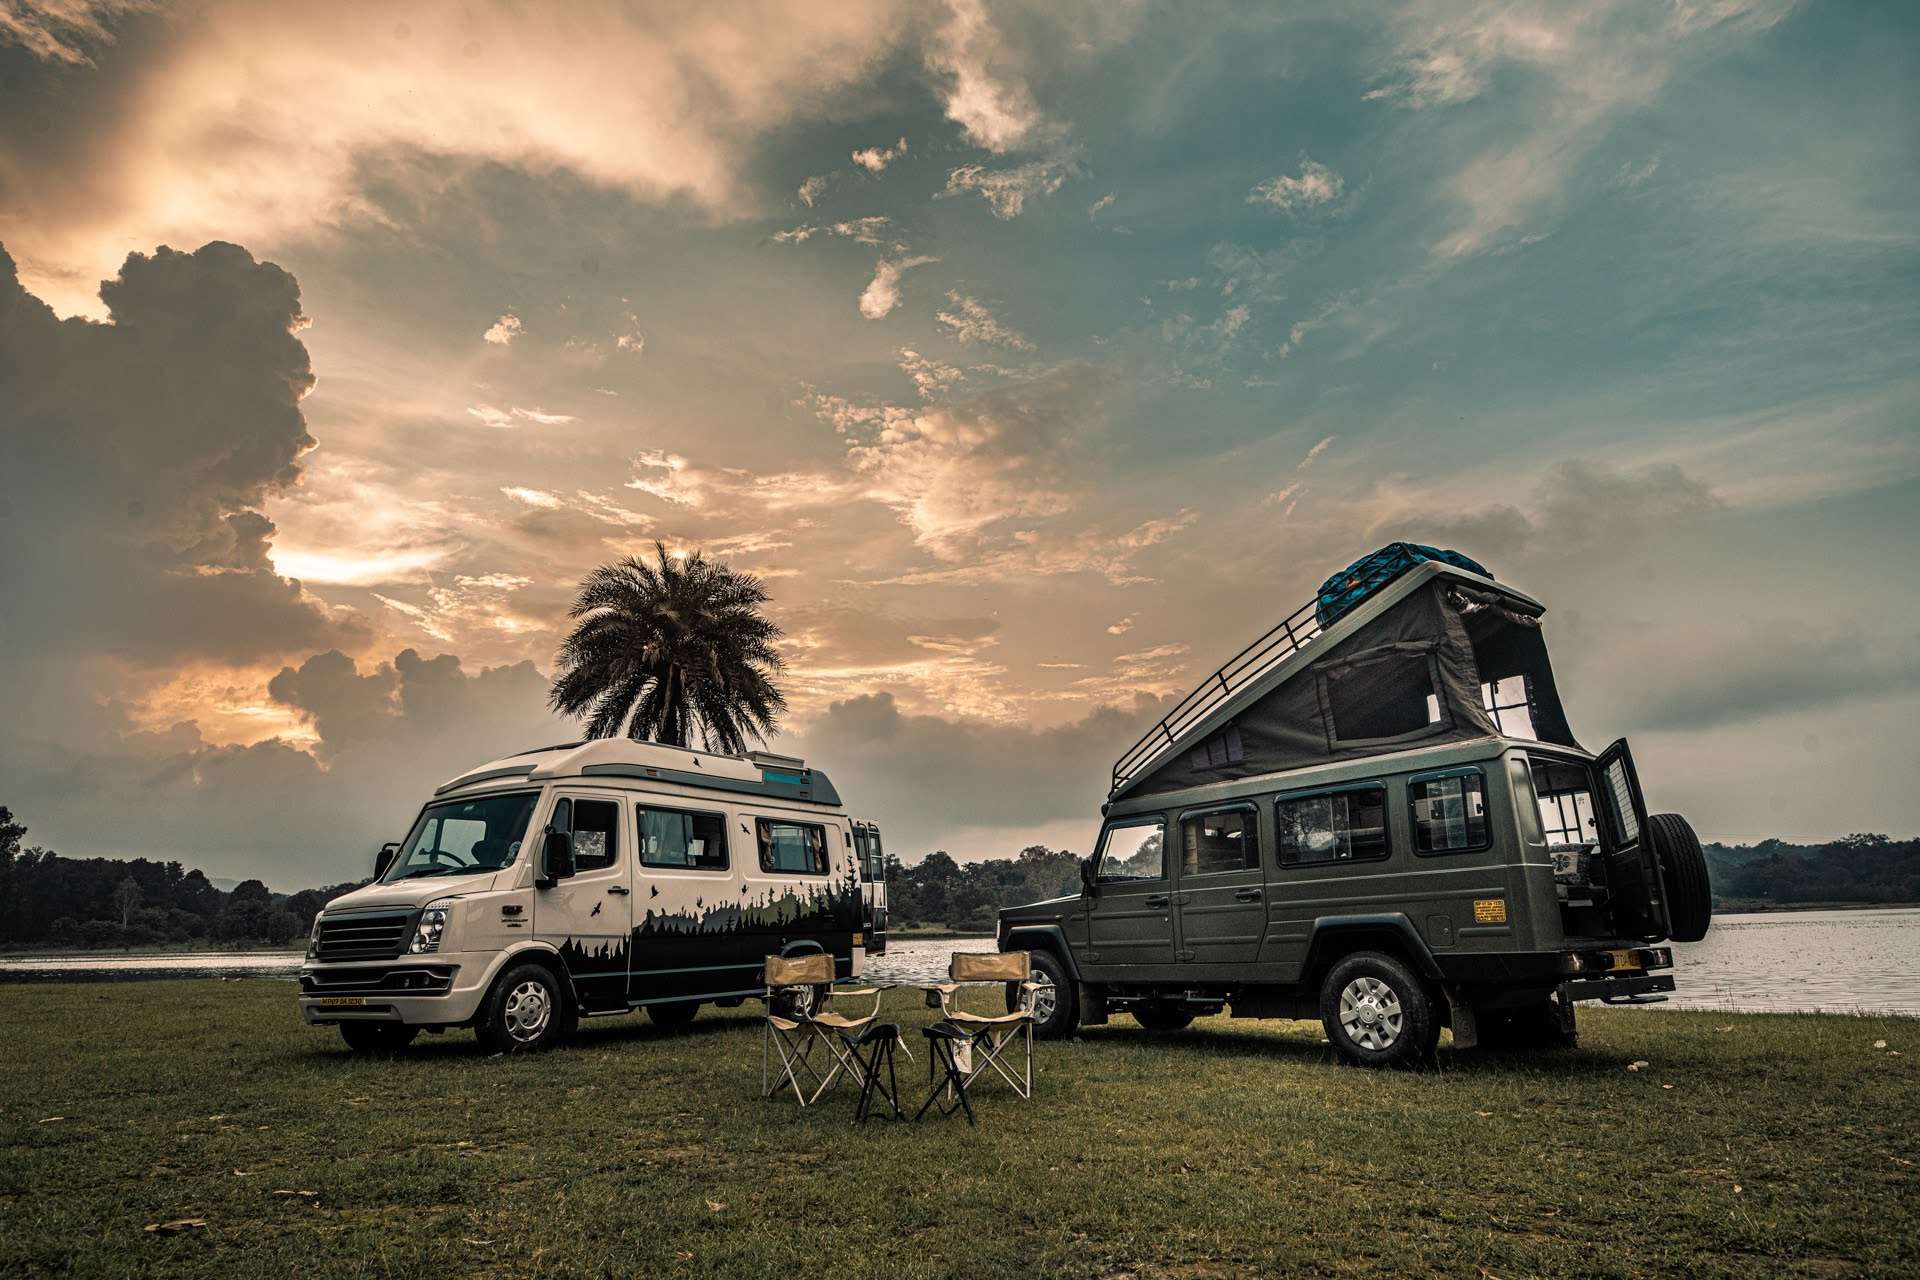 Camper vans are cool way to travel 'slow' India: Experience the #VanLife - Times of